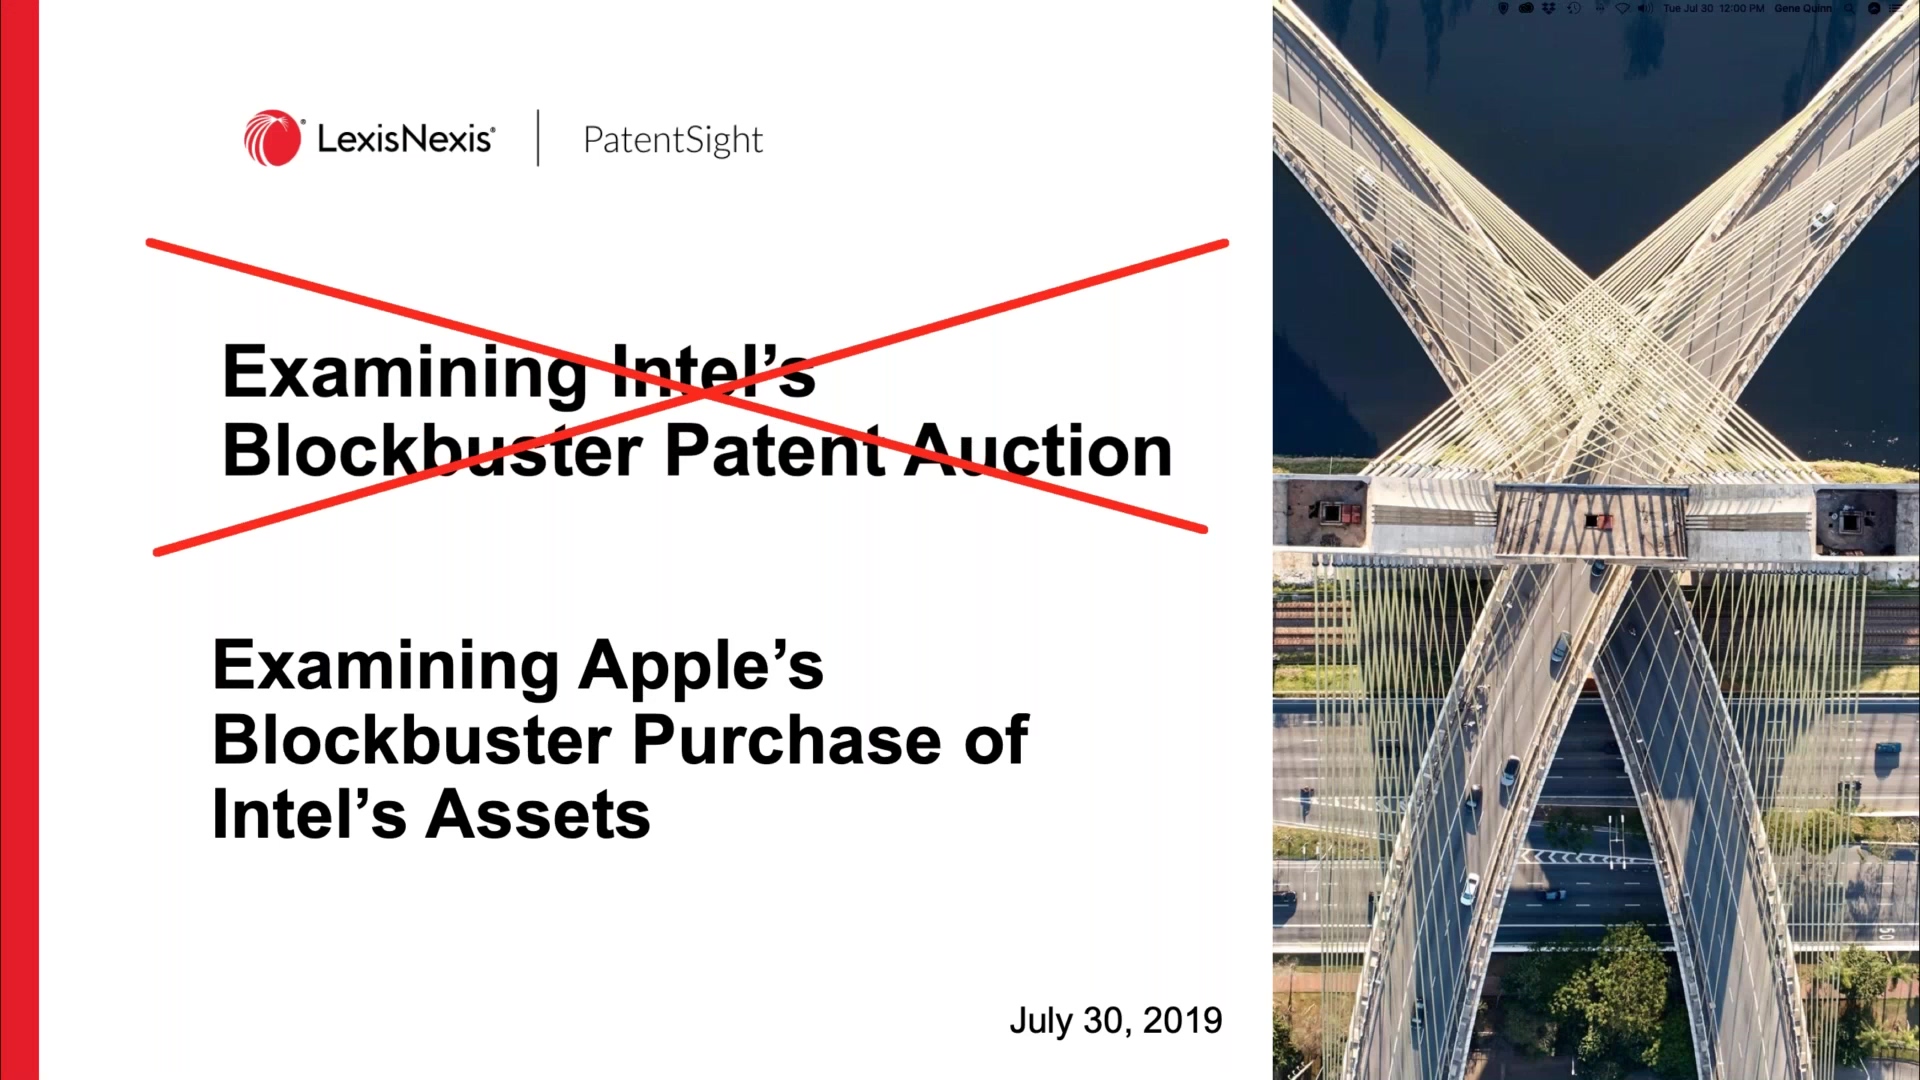 IP - PS - Leads Webinar - Examining Apples Blockbuster Purchase of Intels Assets for $1 Billion